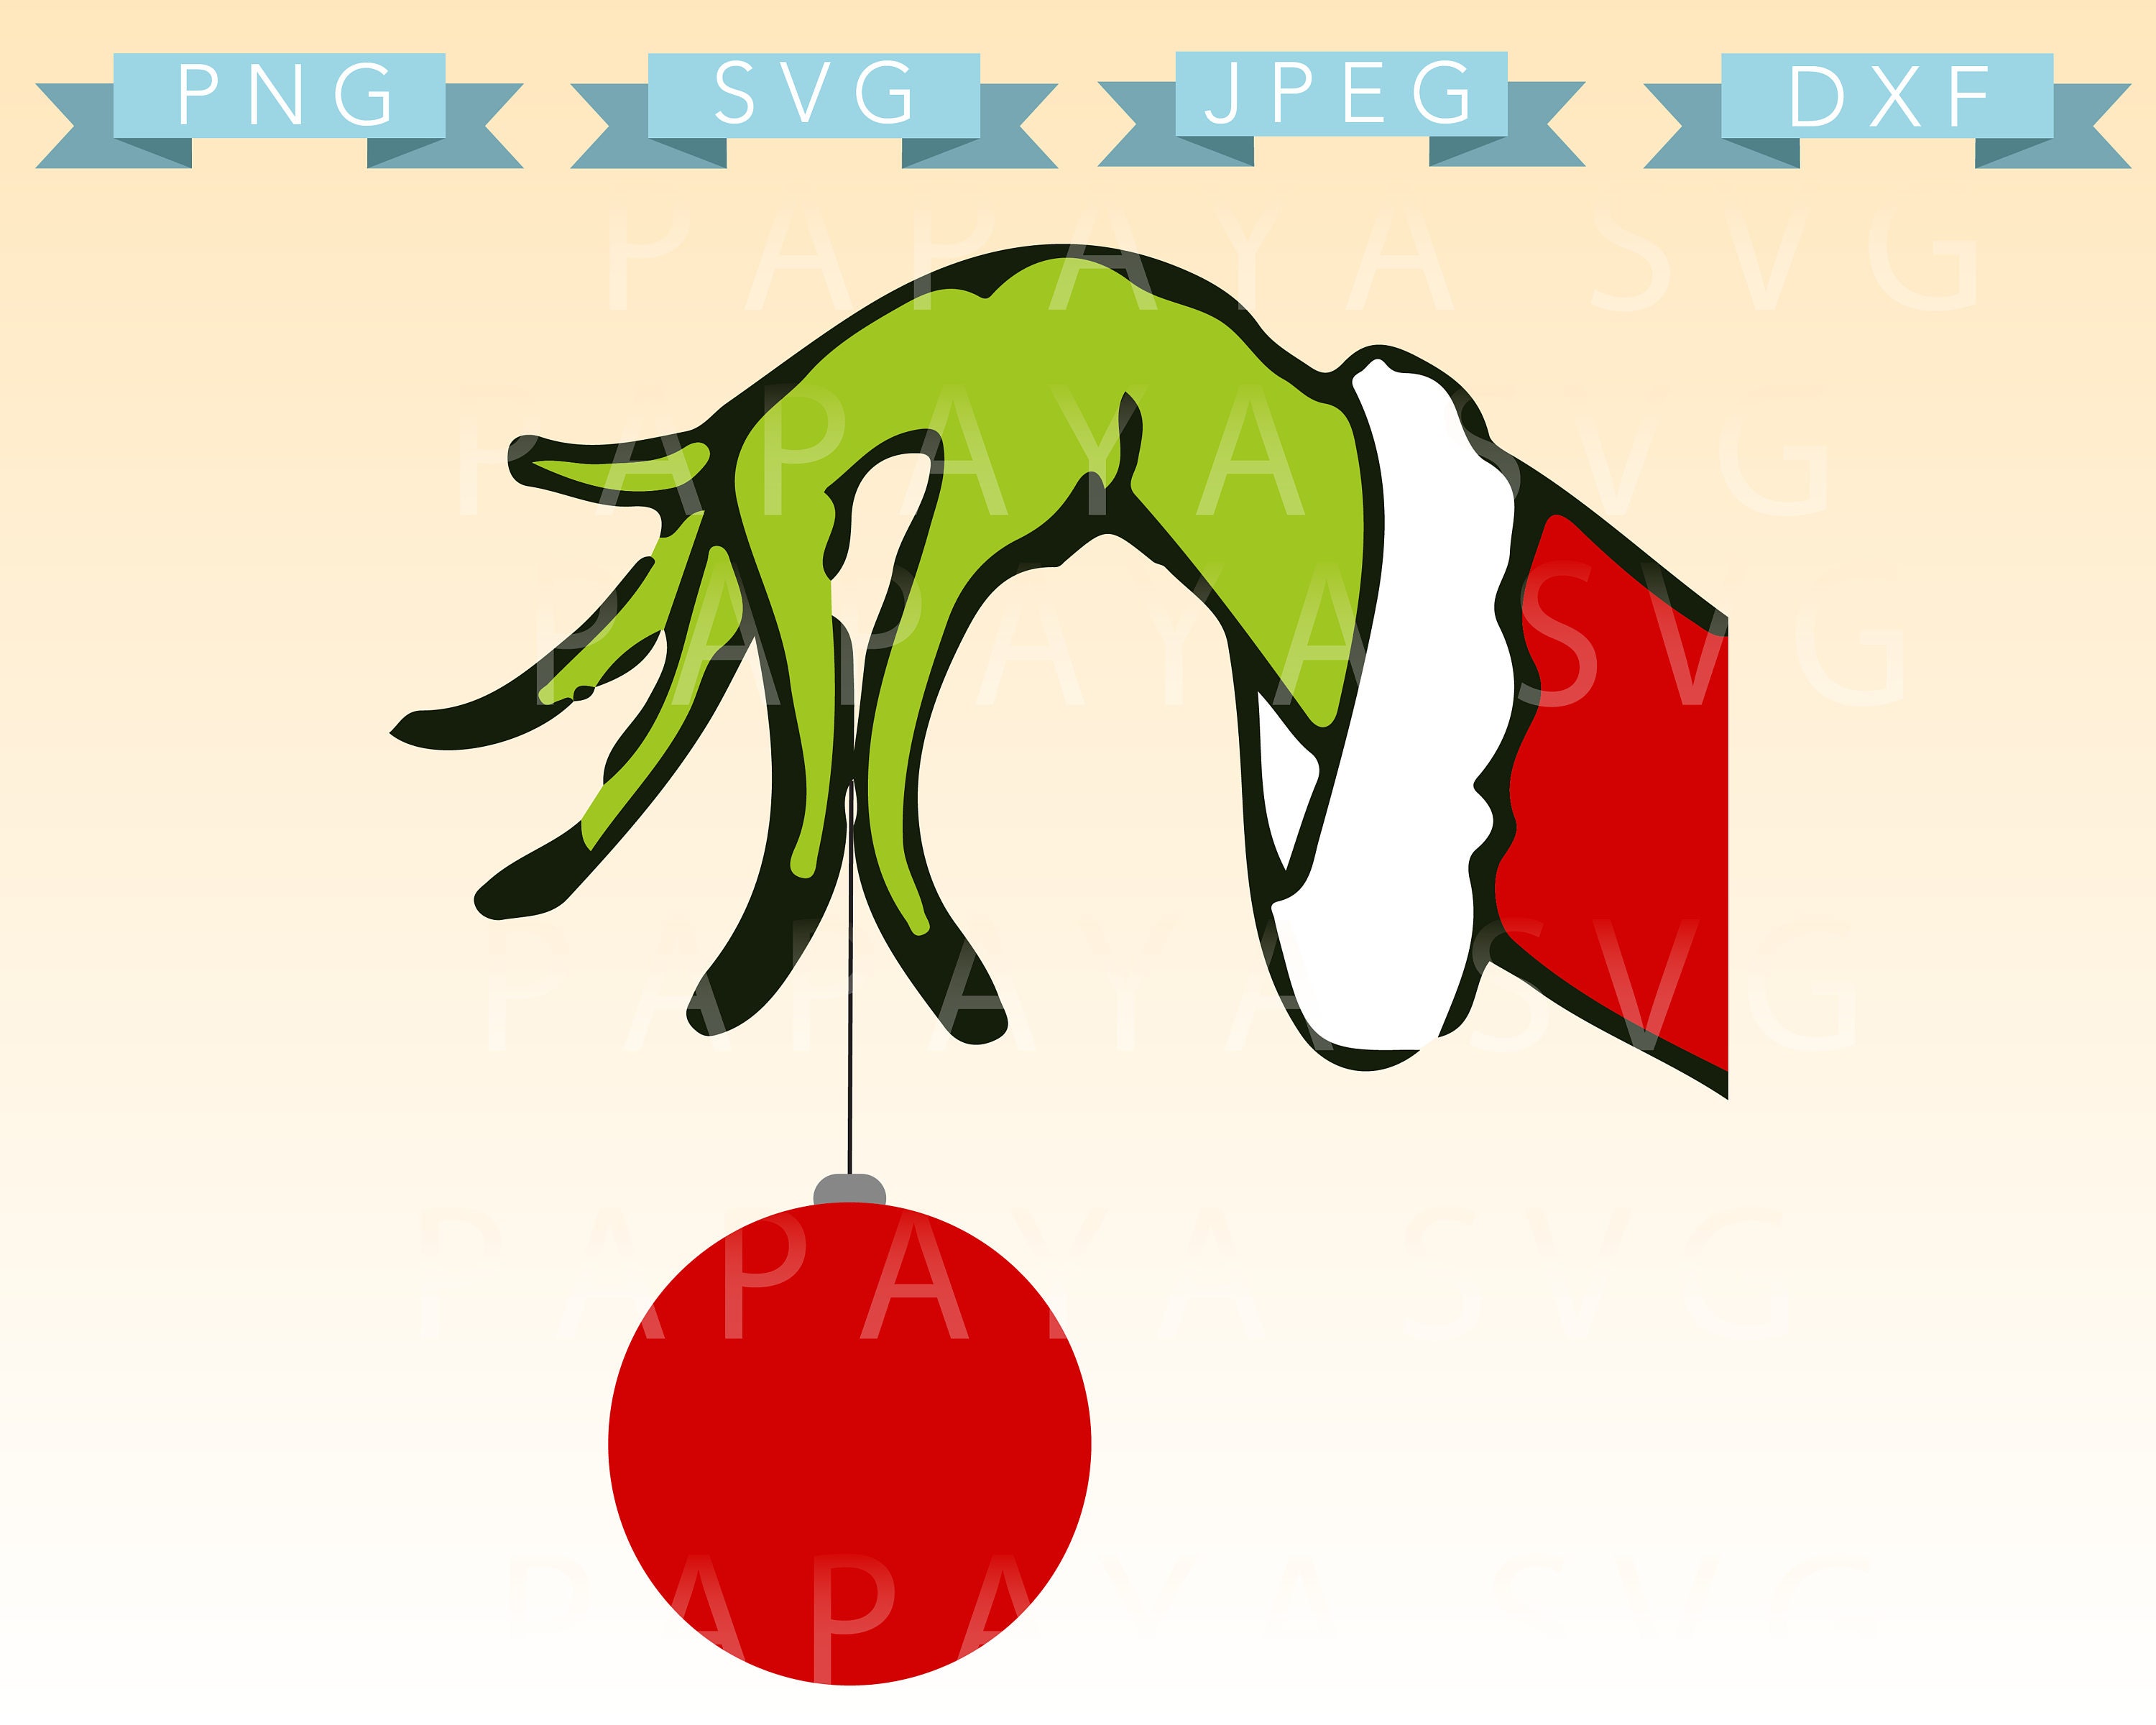 Download Free SVG Cut File - Grinch Hand SVG Grinch The Grinch Stole ...